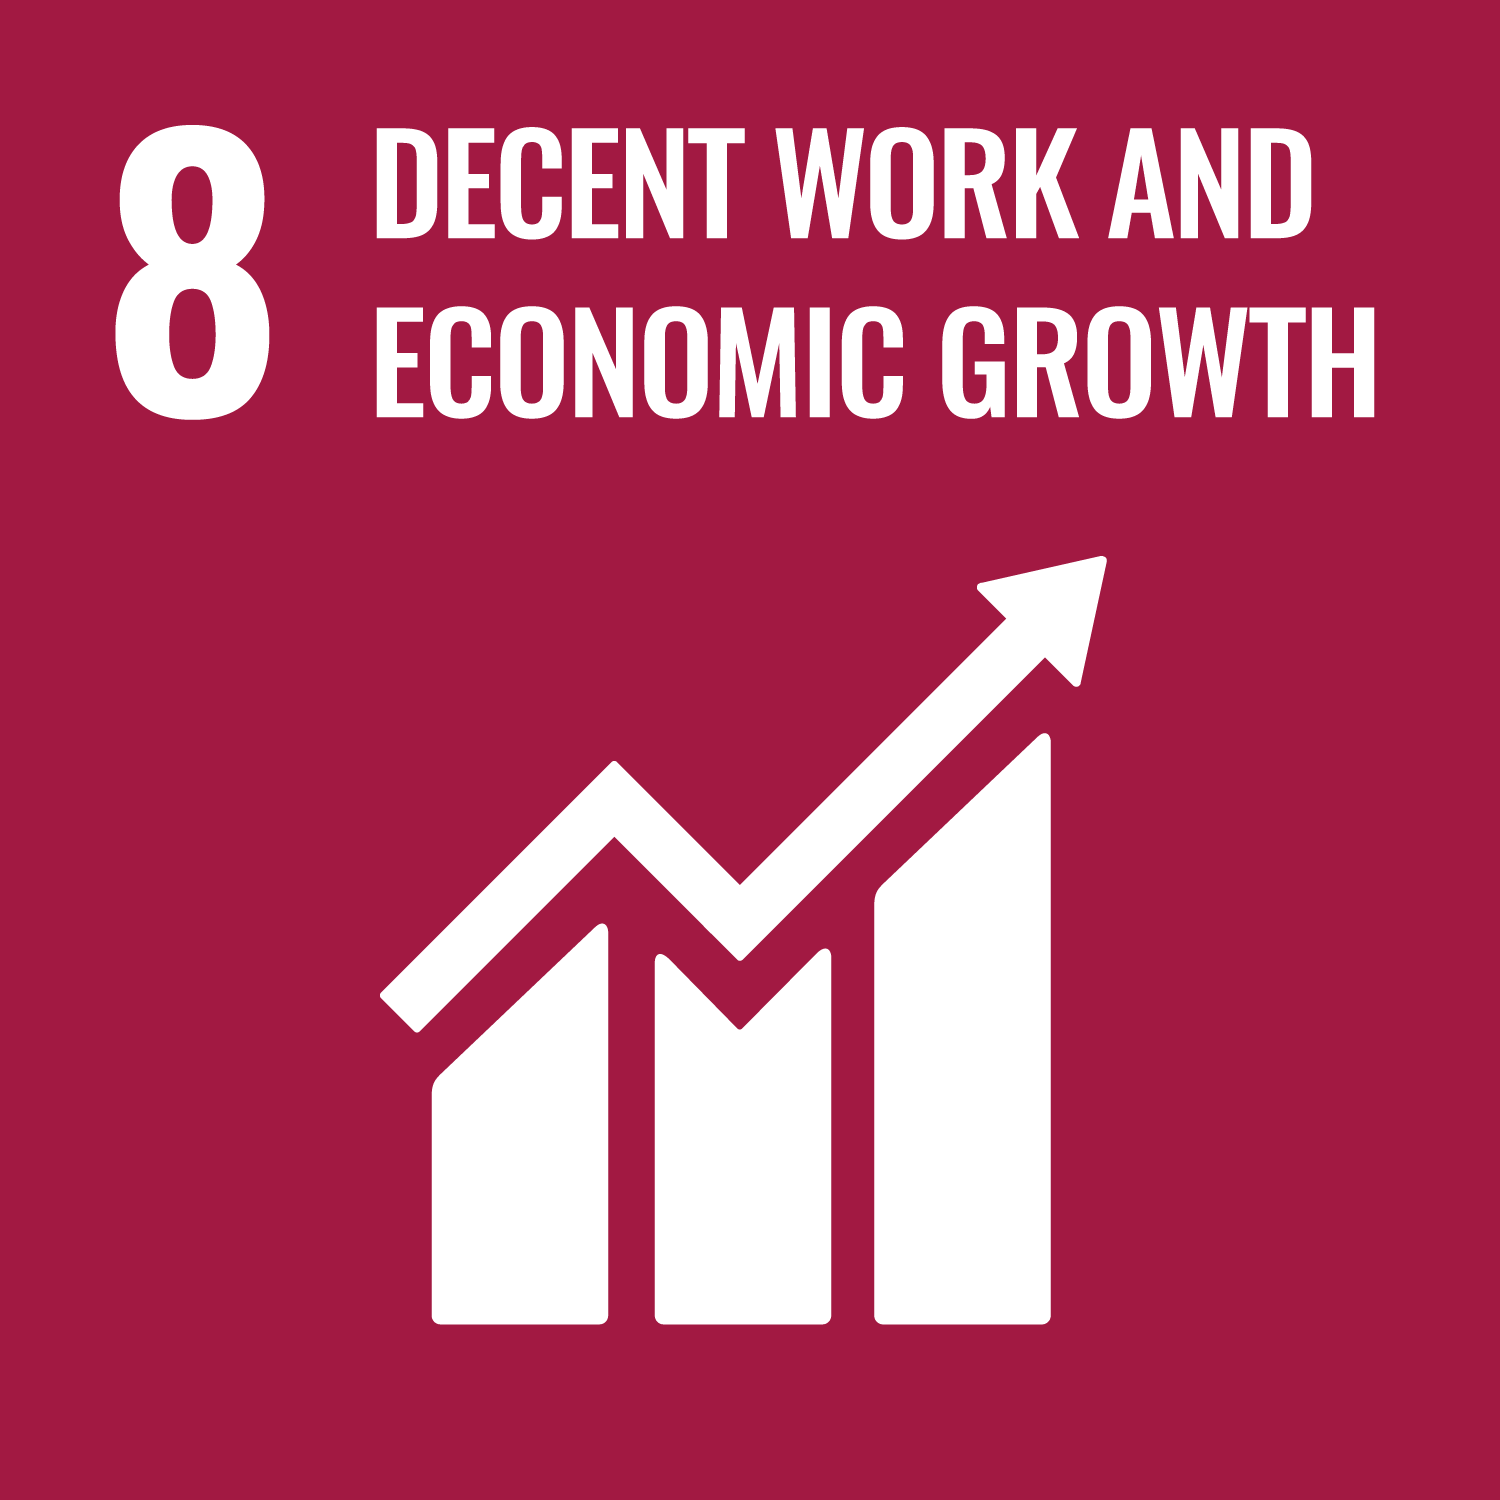 08. Decent Work and Economic Growth